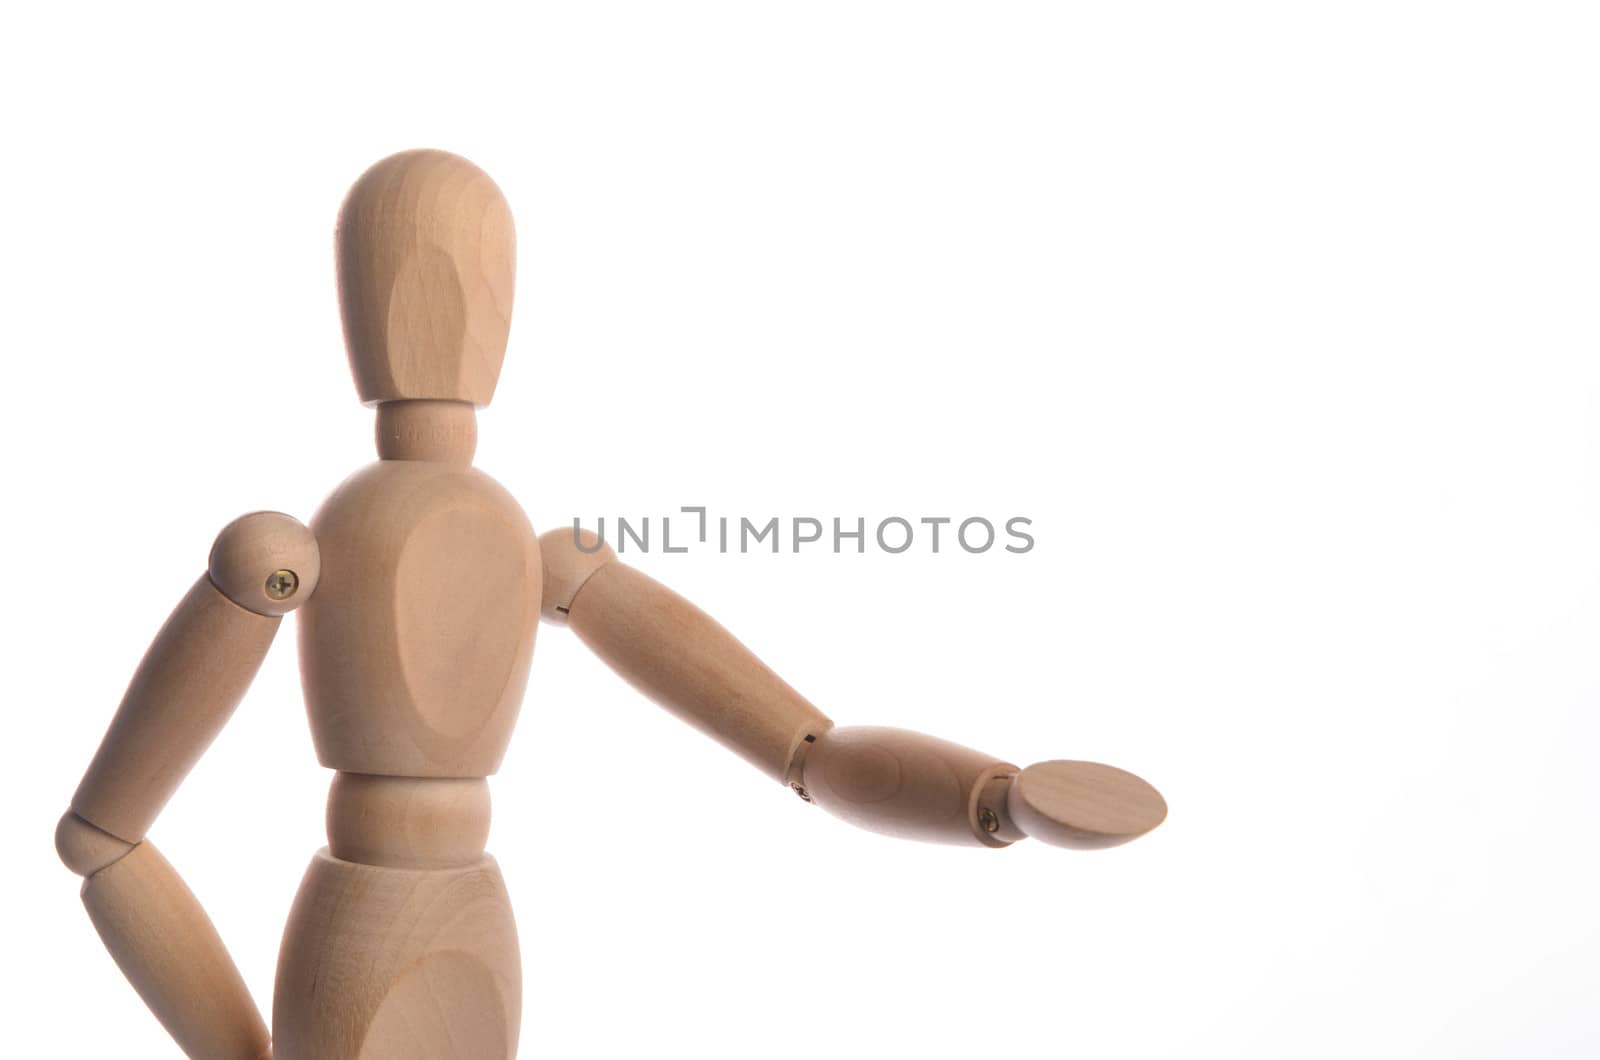 Wooden figure mannequin posing in action isolated on white background.